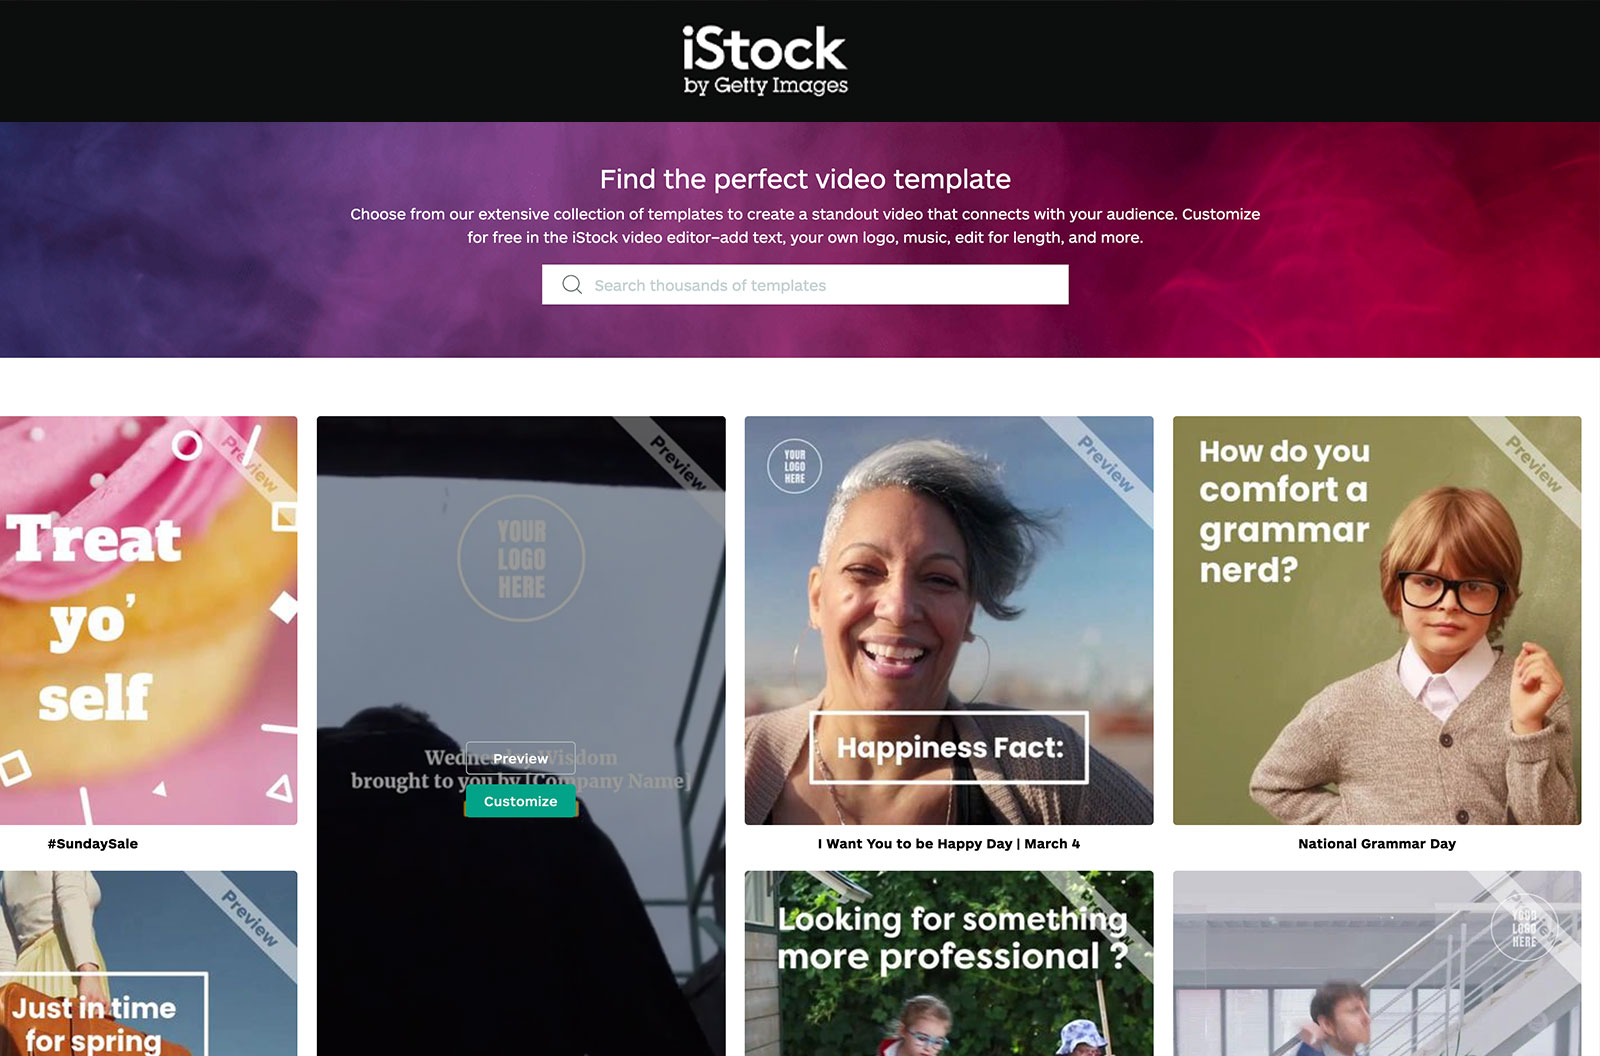 Screenshot of the iStock Video Editor Templates page showing popular and trending video templates